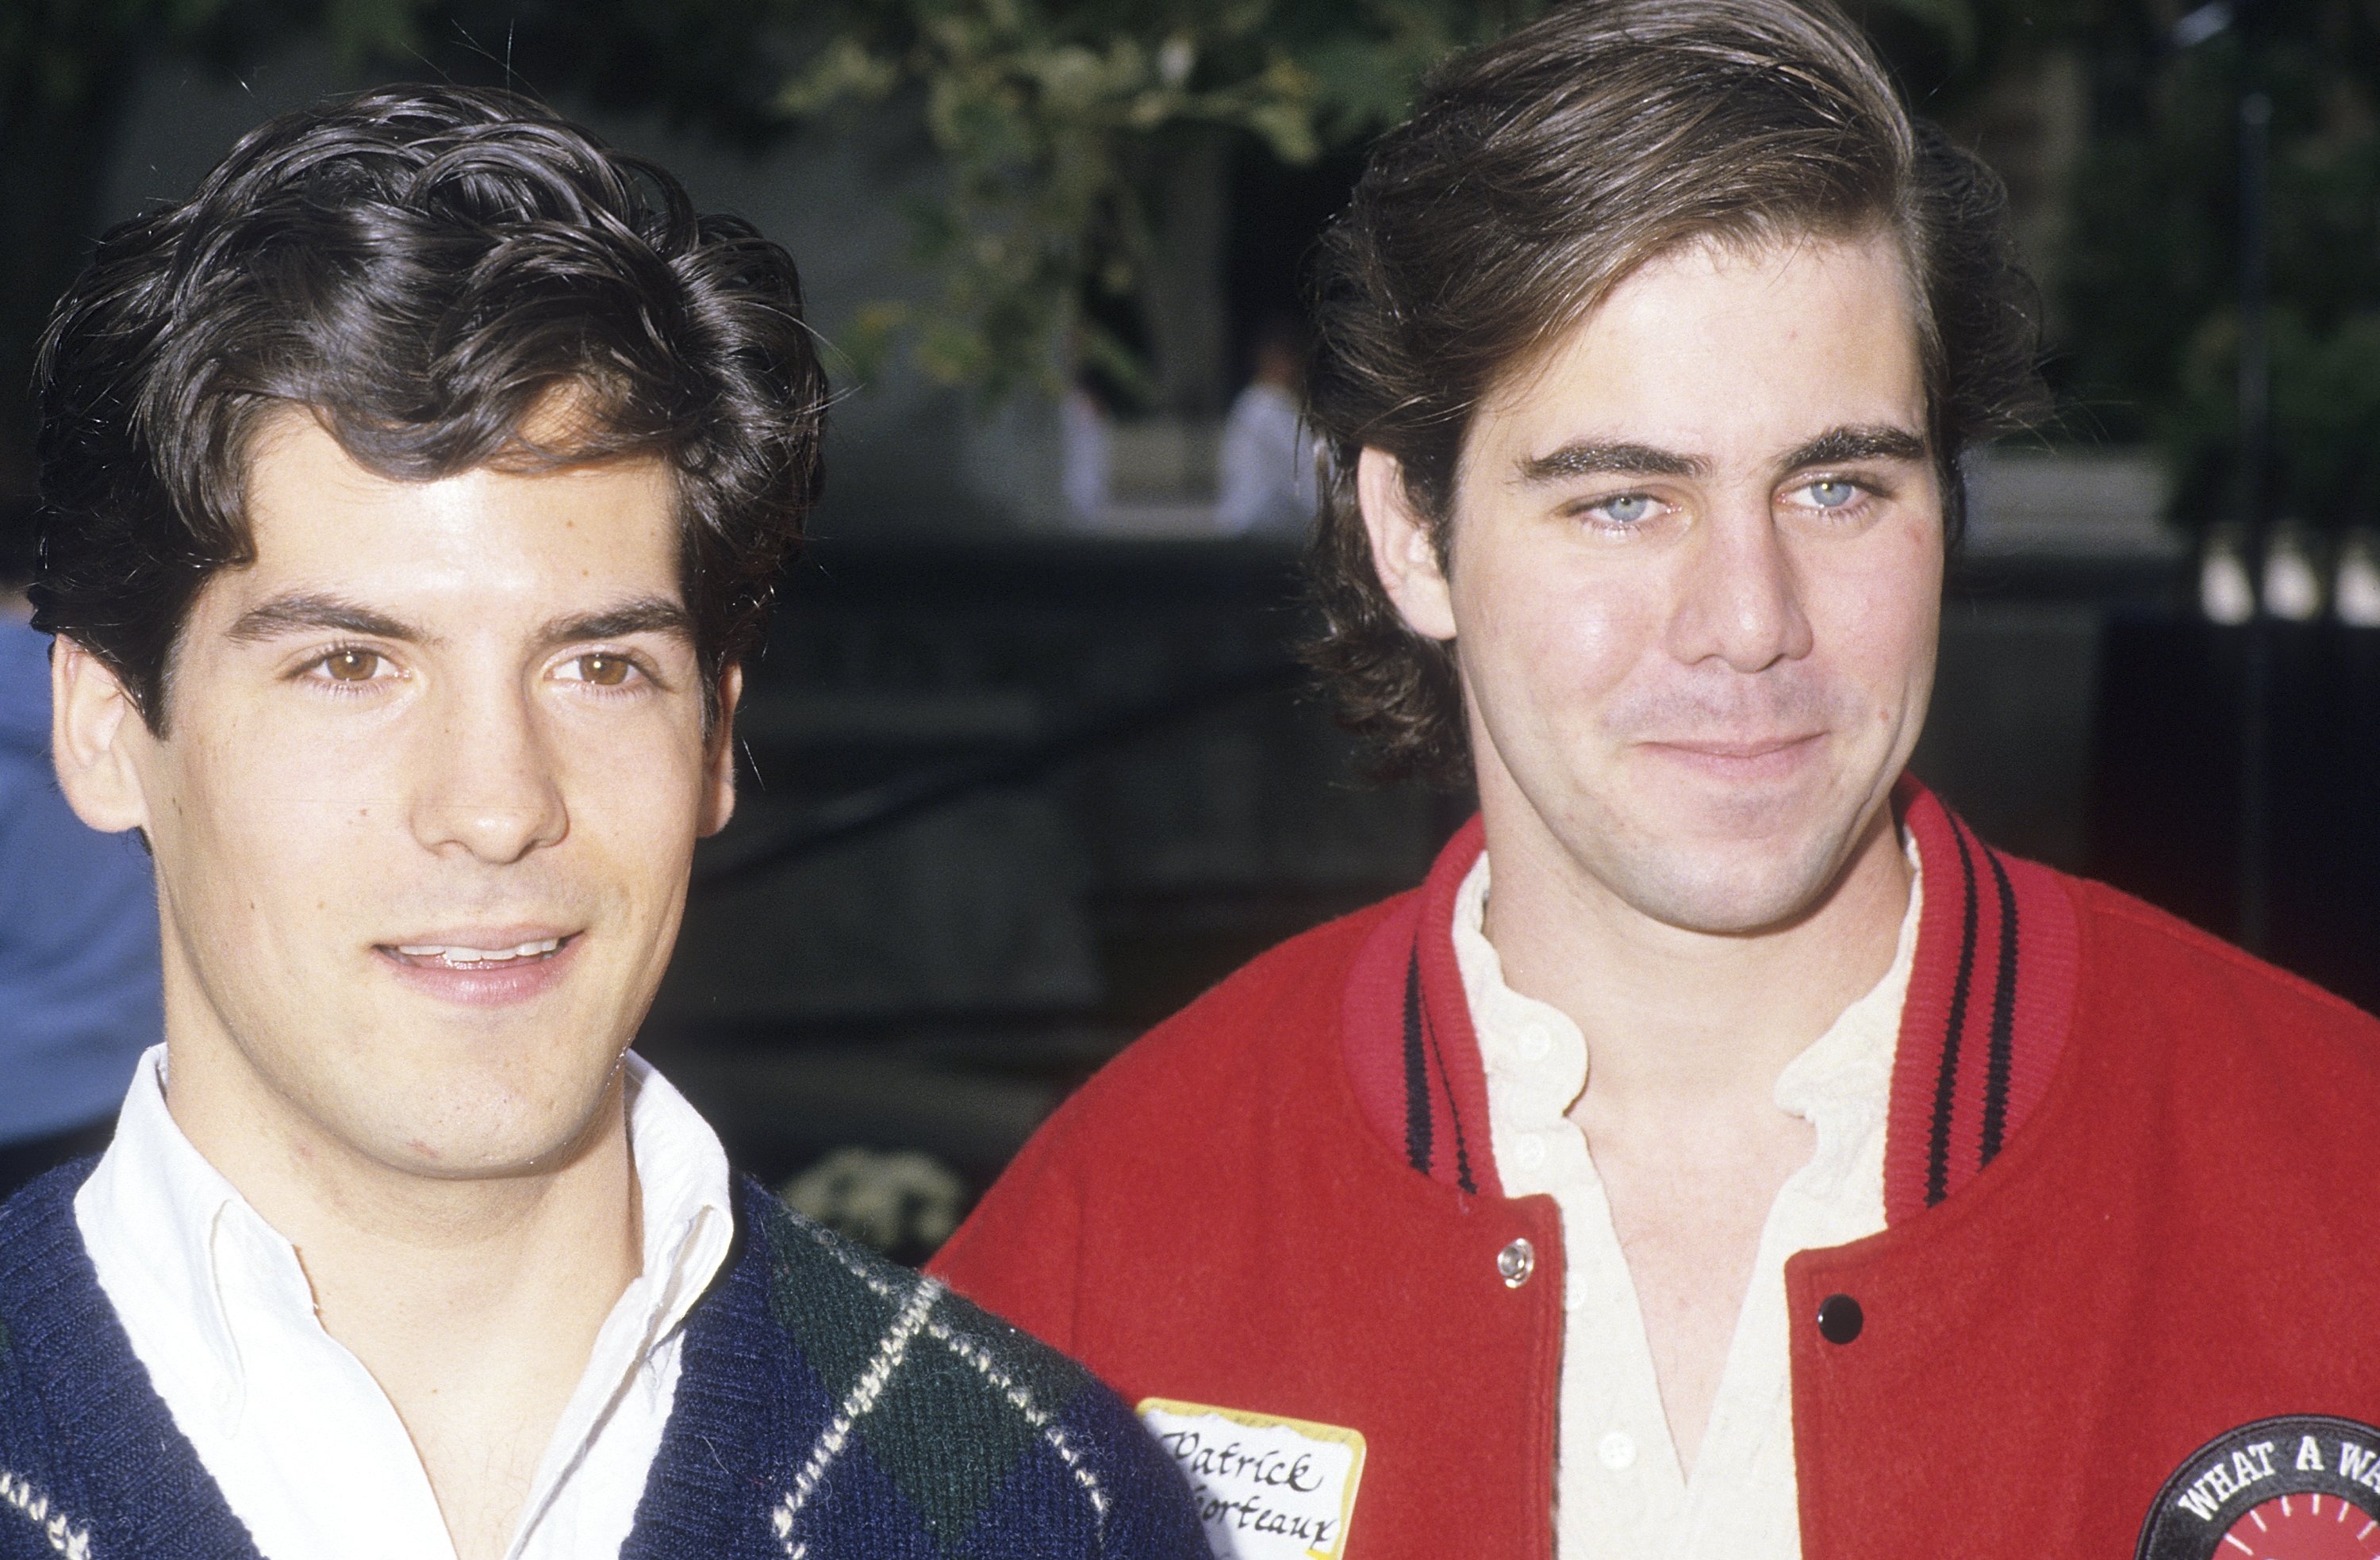 Matthew Labyorteaux and Patrick Labyorteaux at the 19th Annual California Special Olympics Summer Games Opening Night Ceremonies on June 17, 1988, in Westwood, California | Source: Getty Images